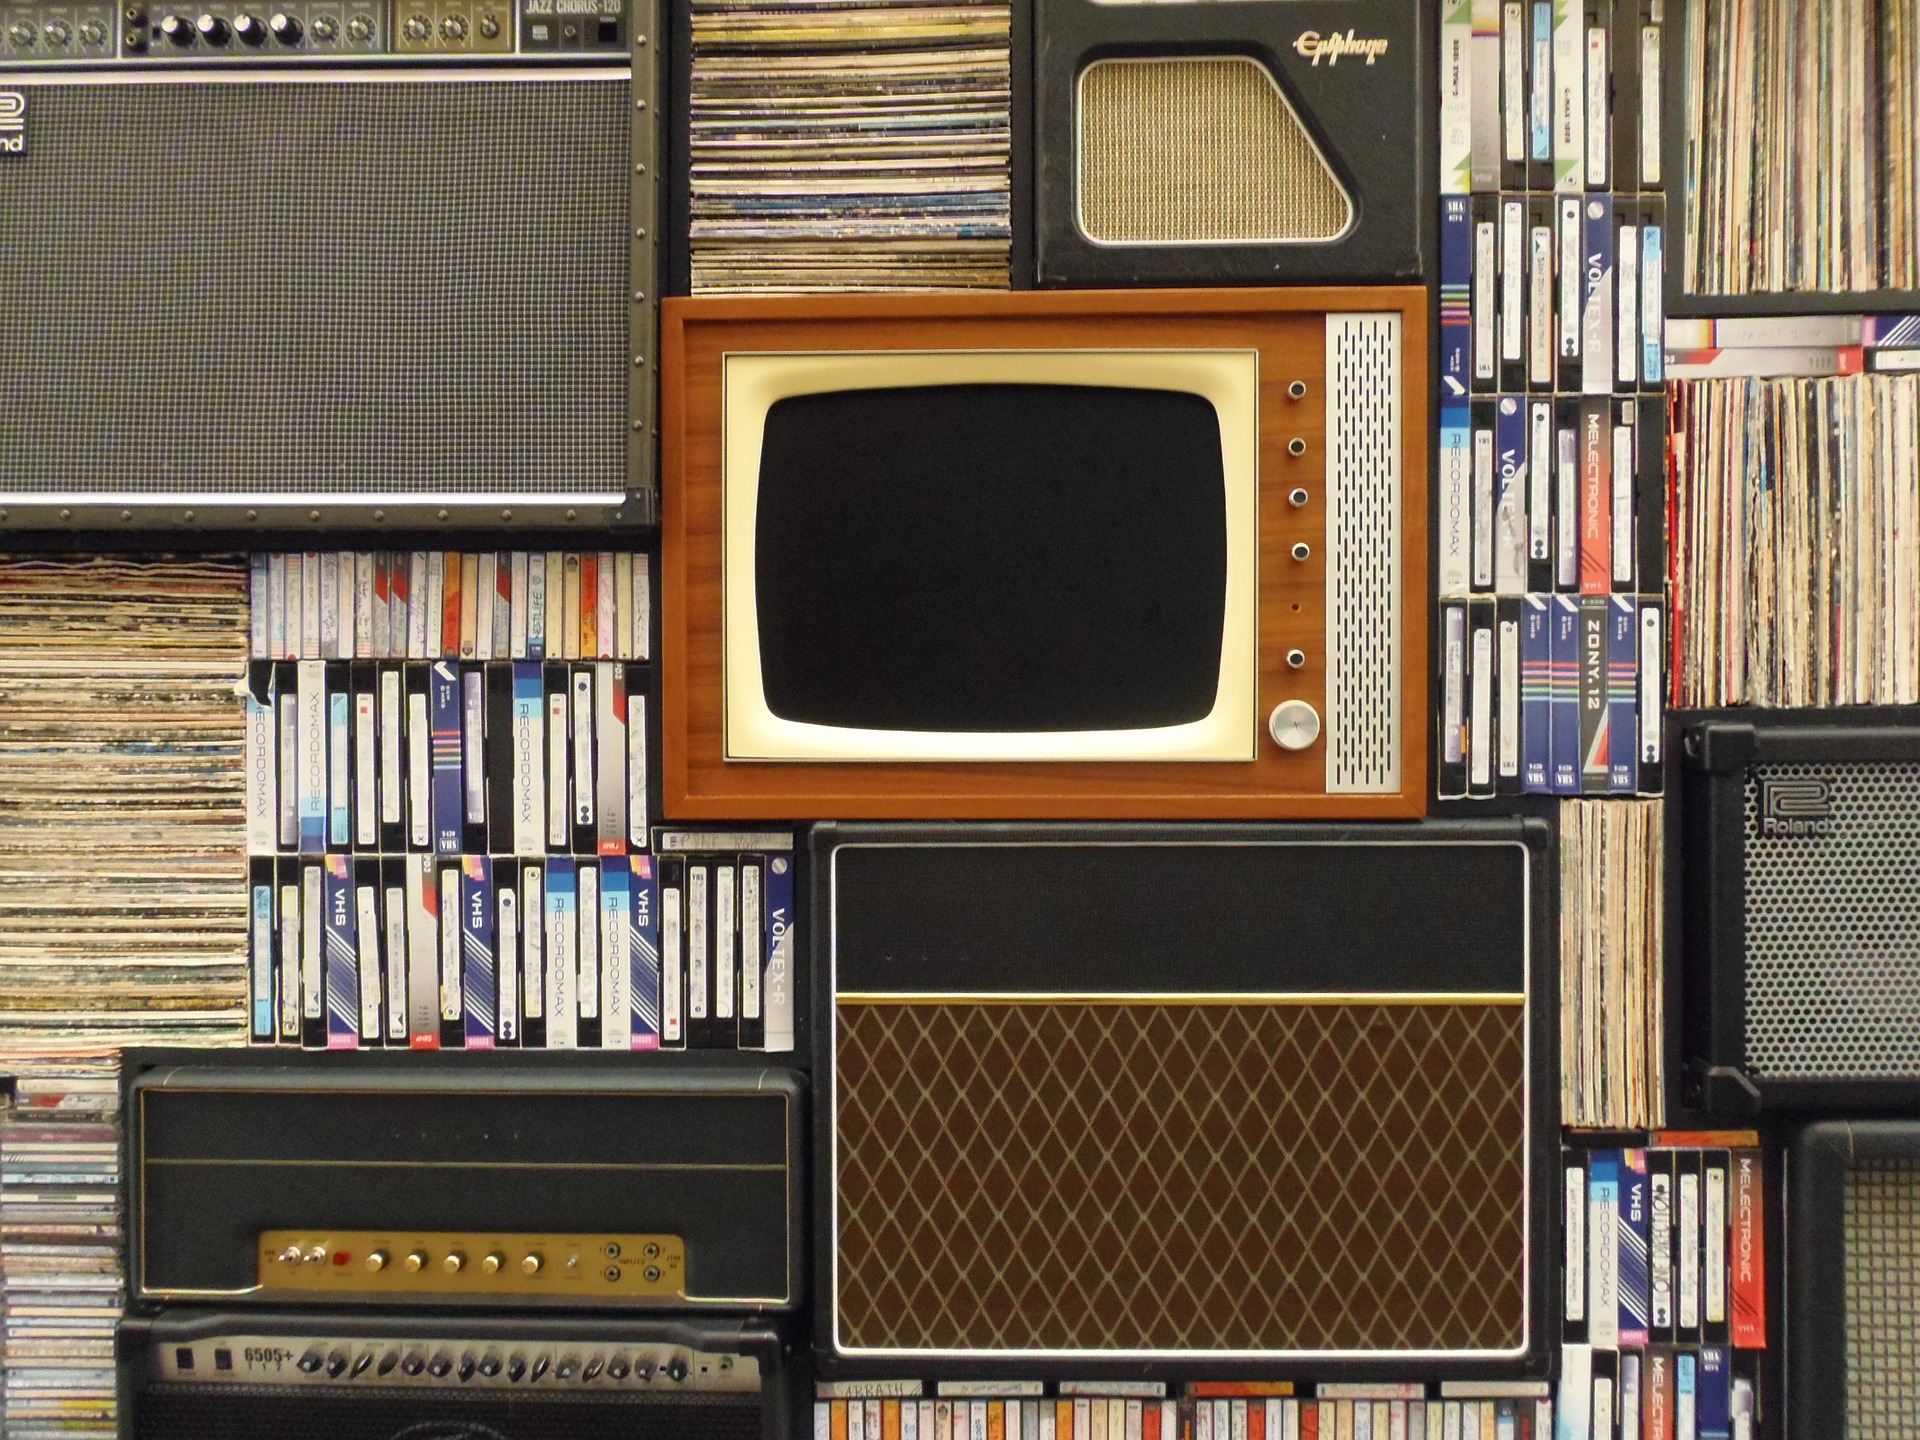 While your TV might not look like this any more, any way of watching videos can help you improve your language skills.